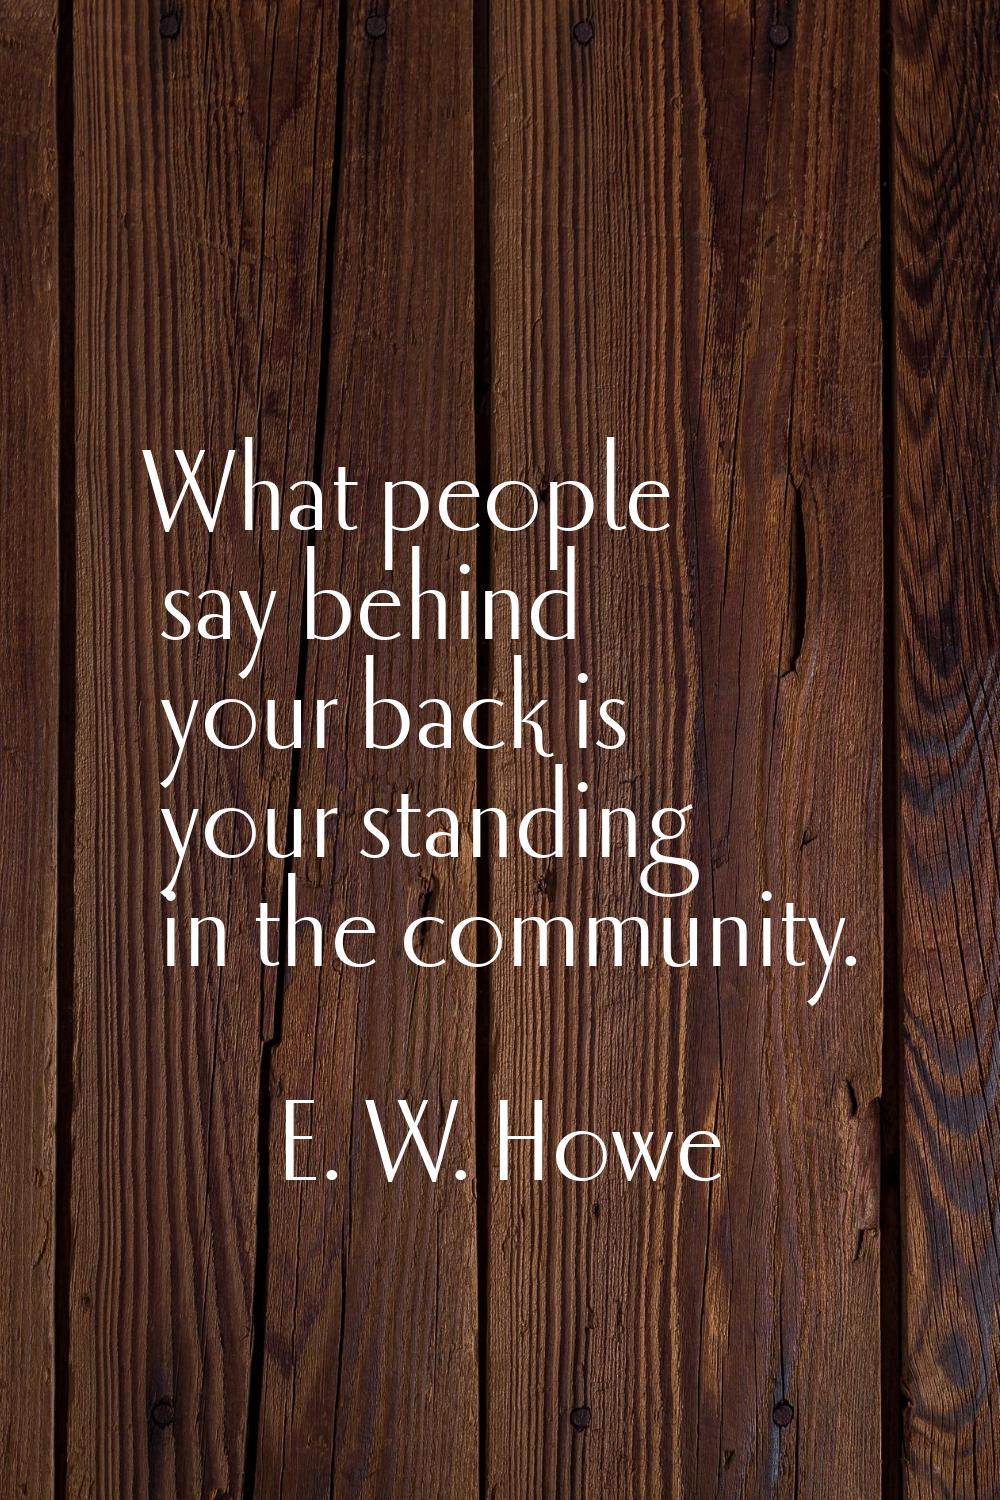 What people say behind your back is your standing in the community.